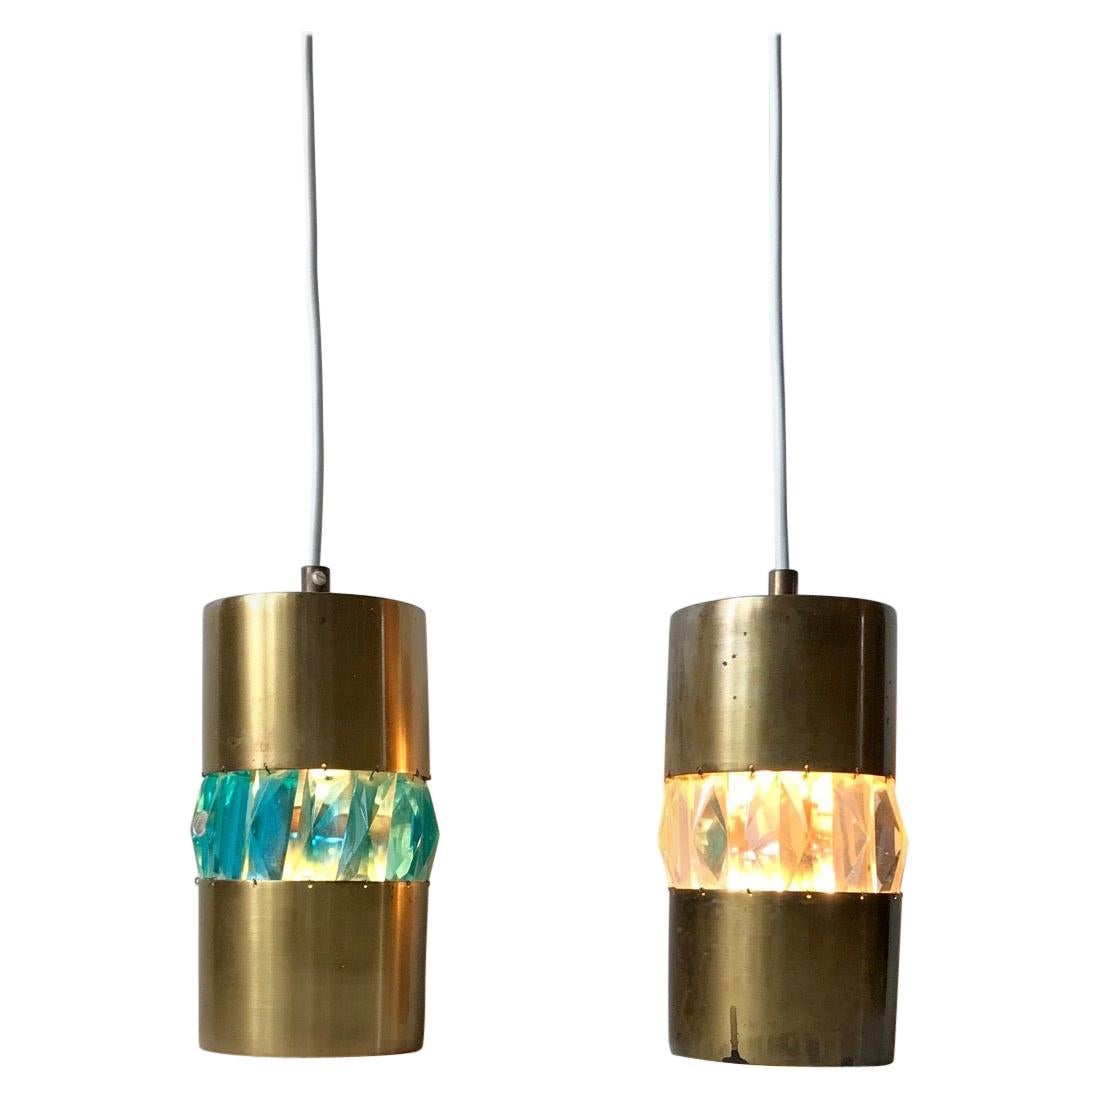 Midcentury Brass Pendant Lamps with Bohemian Crystal Prisms, 1960s